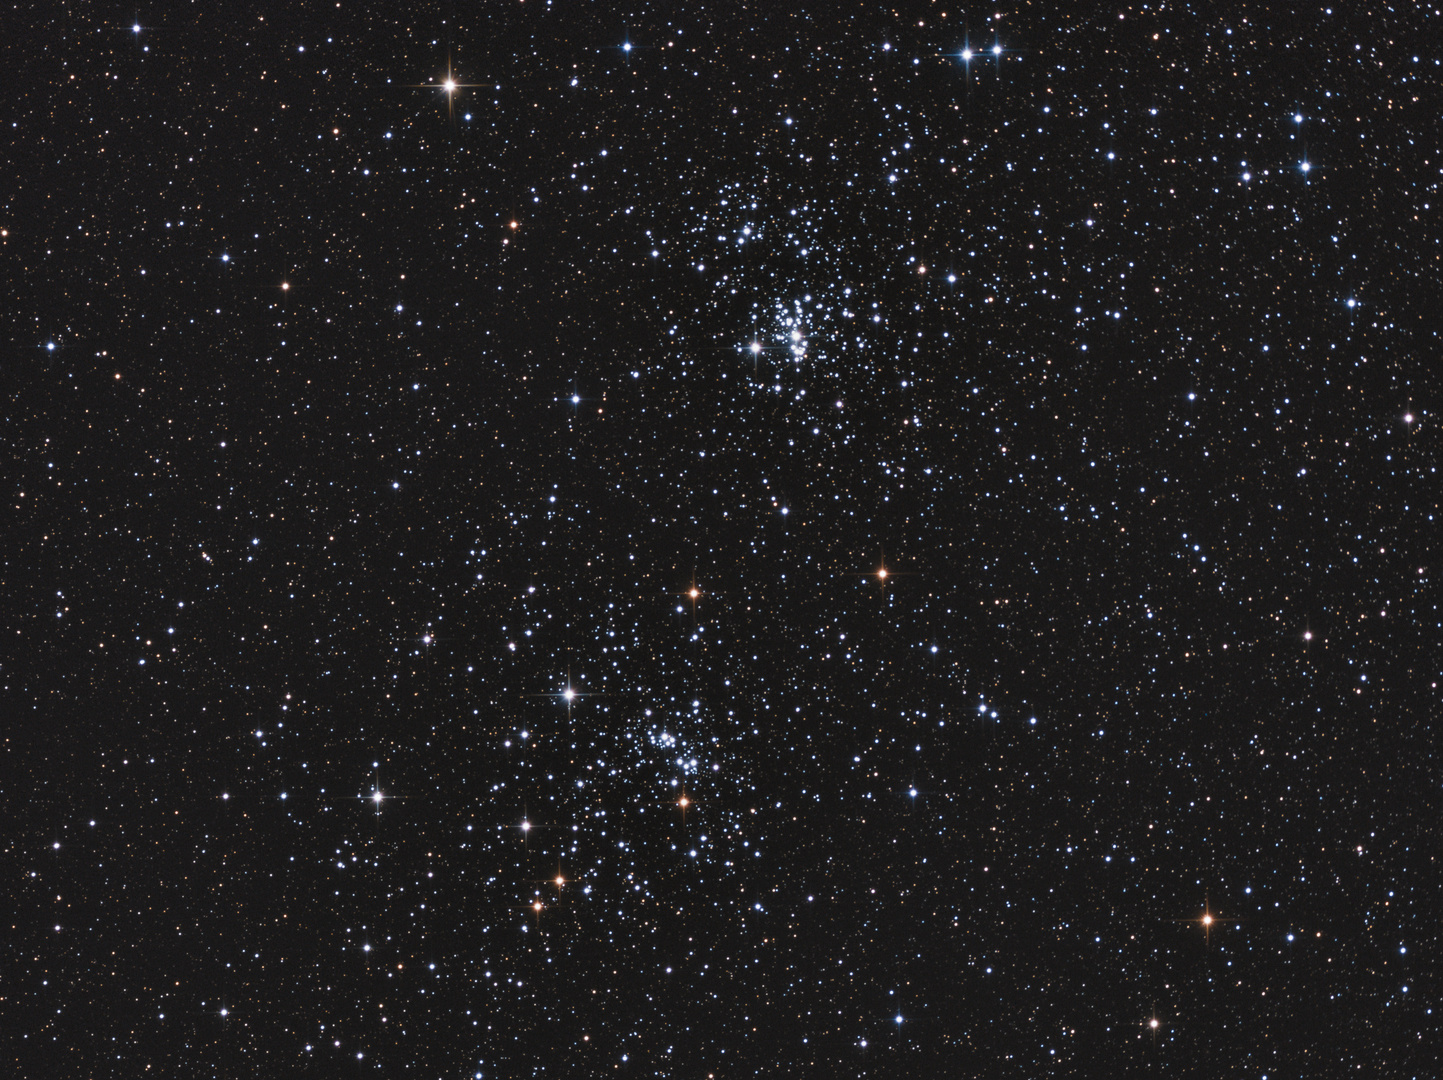 h Persei NGC 869 und Chi Persei NGC 884